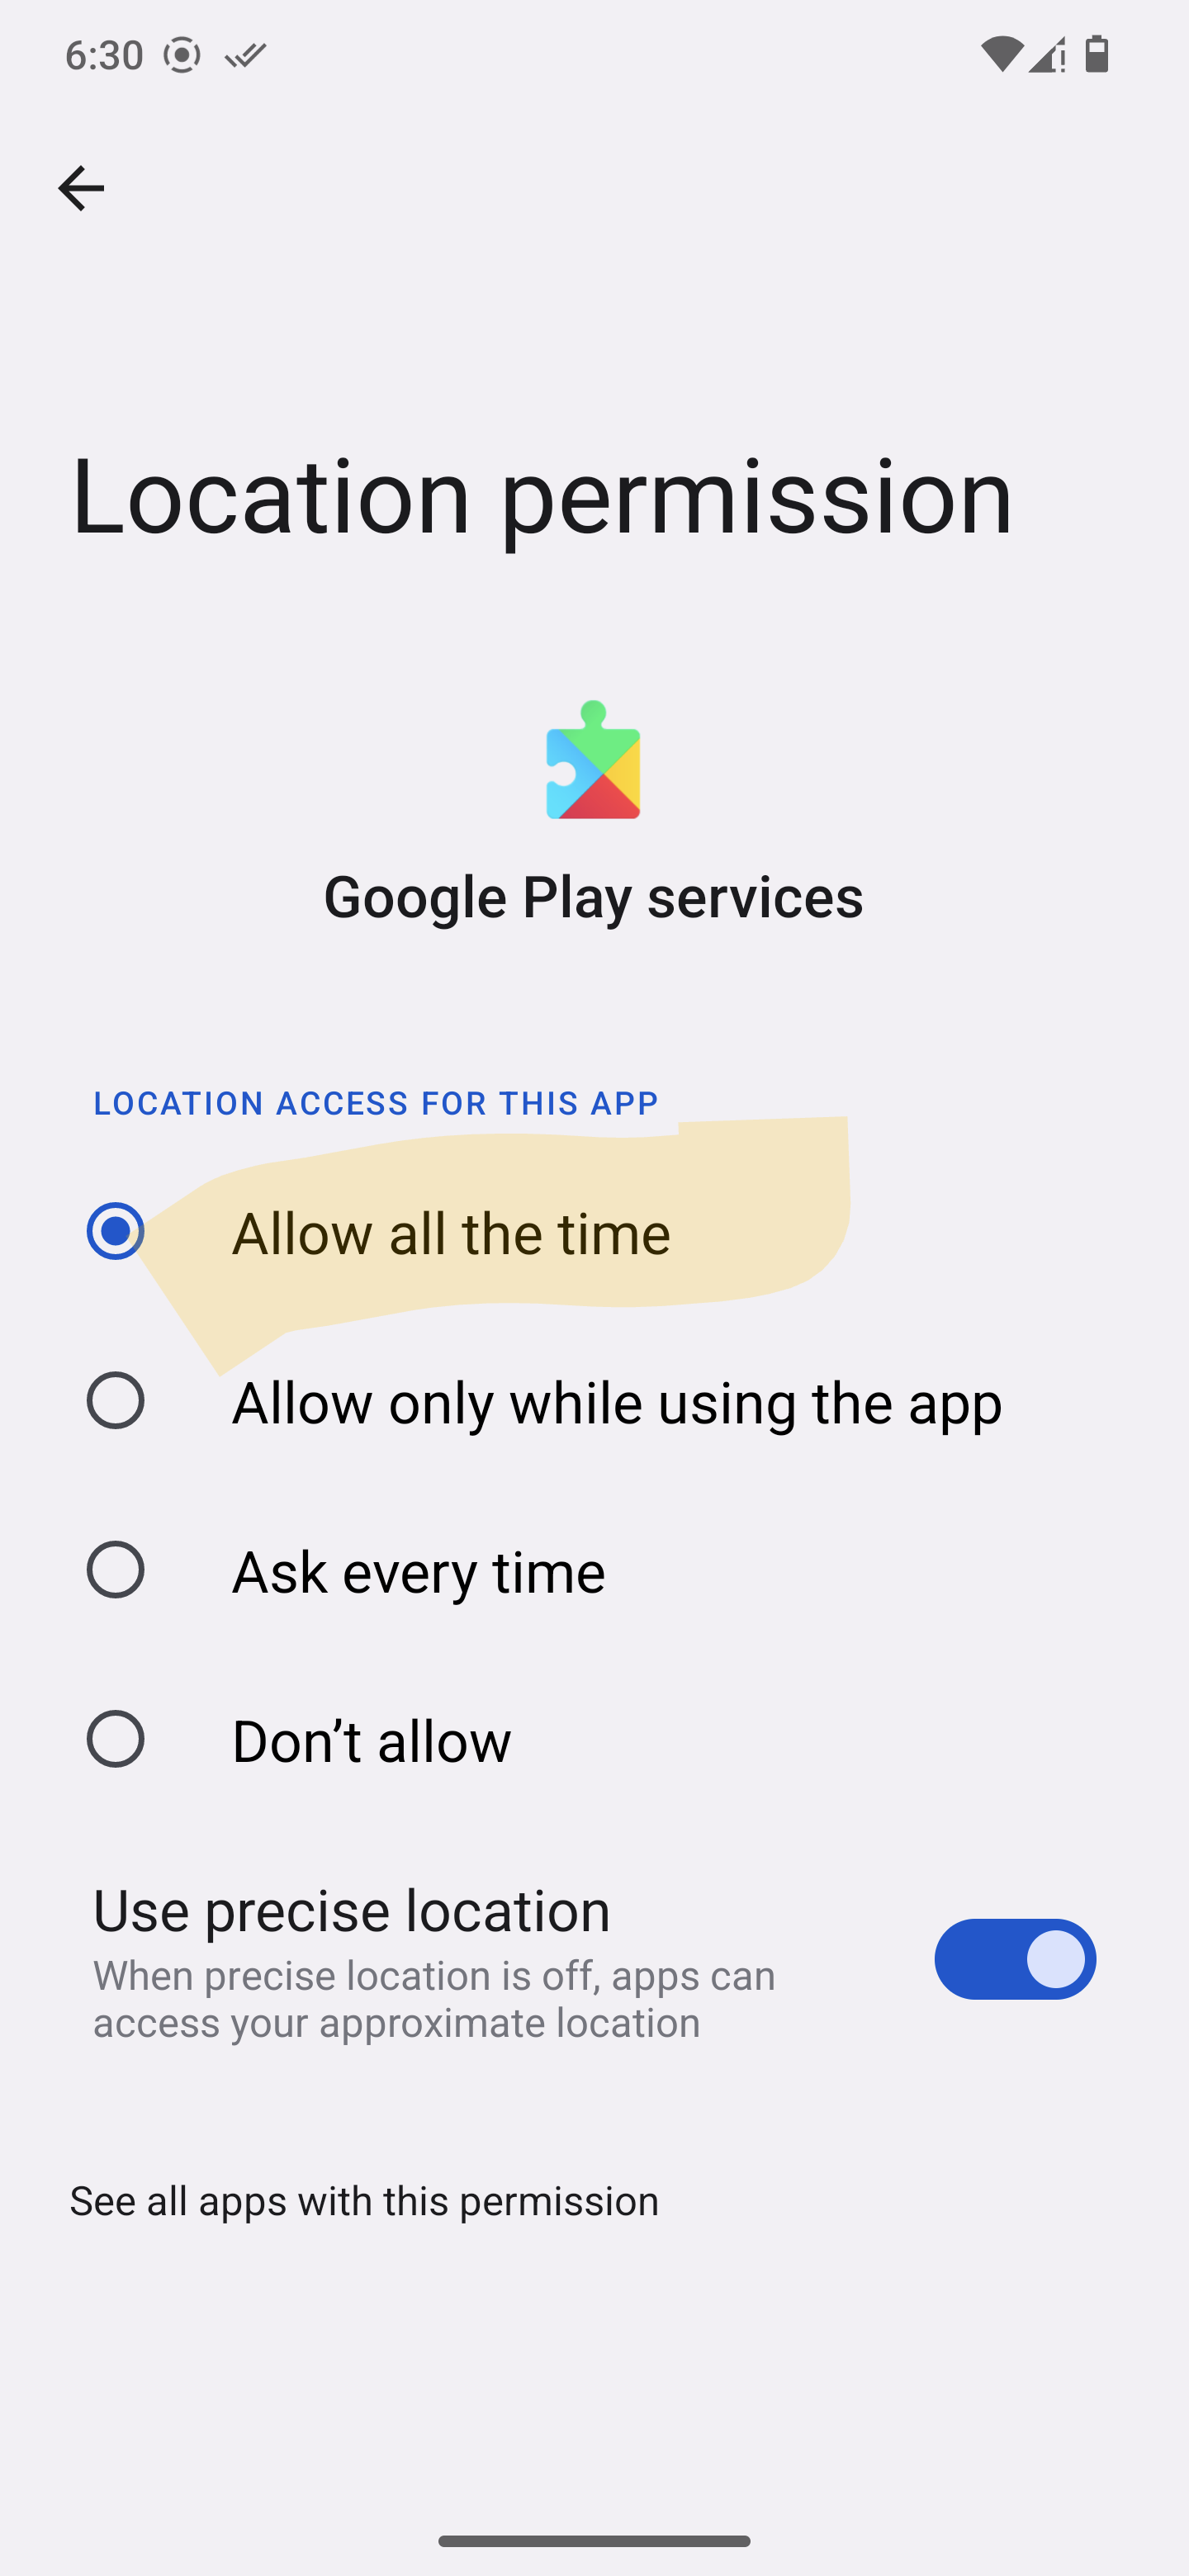 Location Permission now allowed All the Time